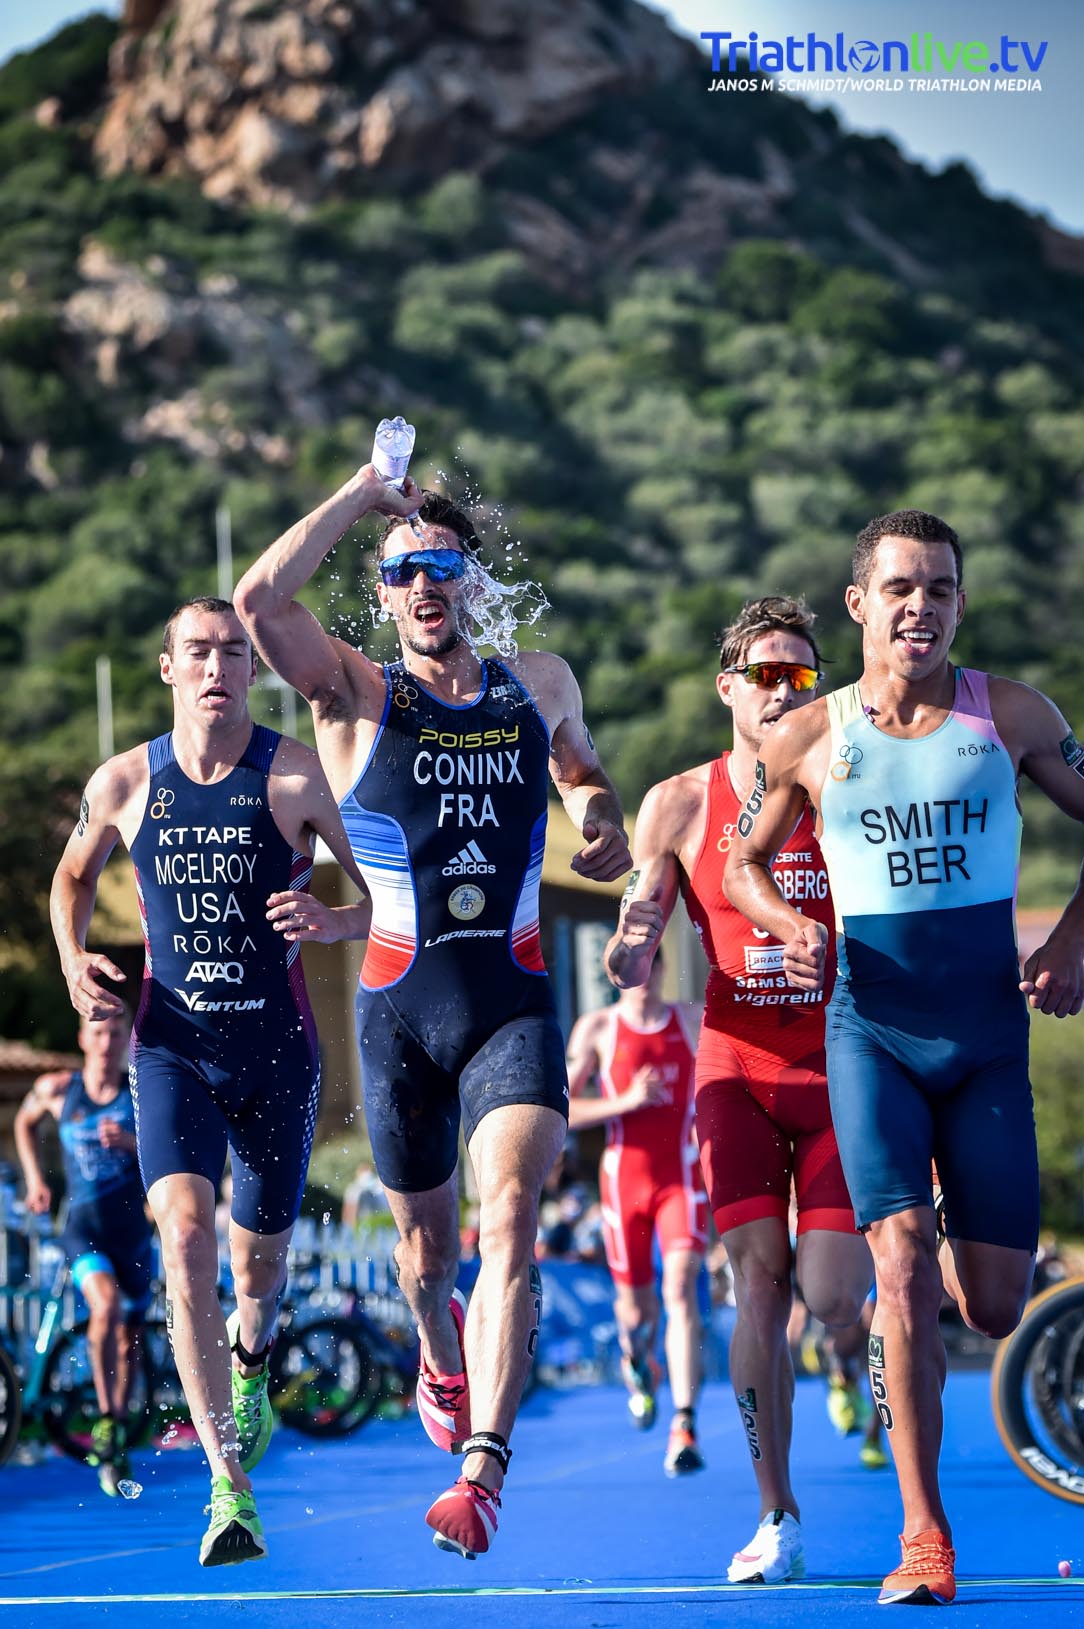 Racing heads to Italy for Arzachena World Cup • World Triathlon